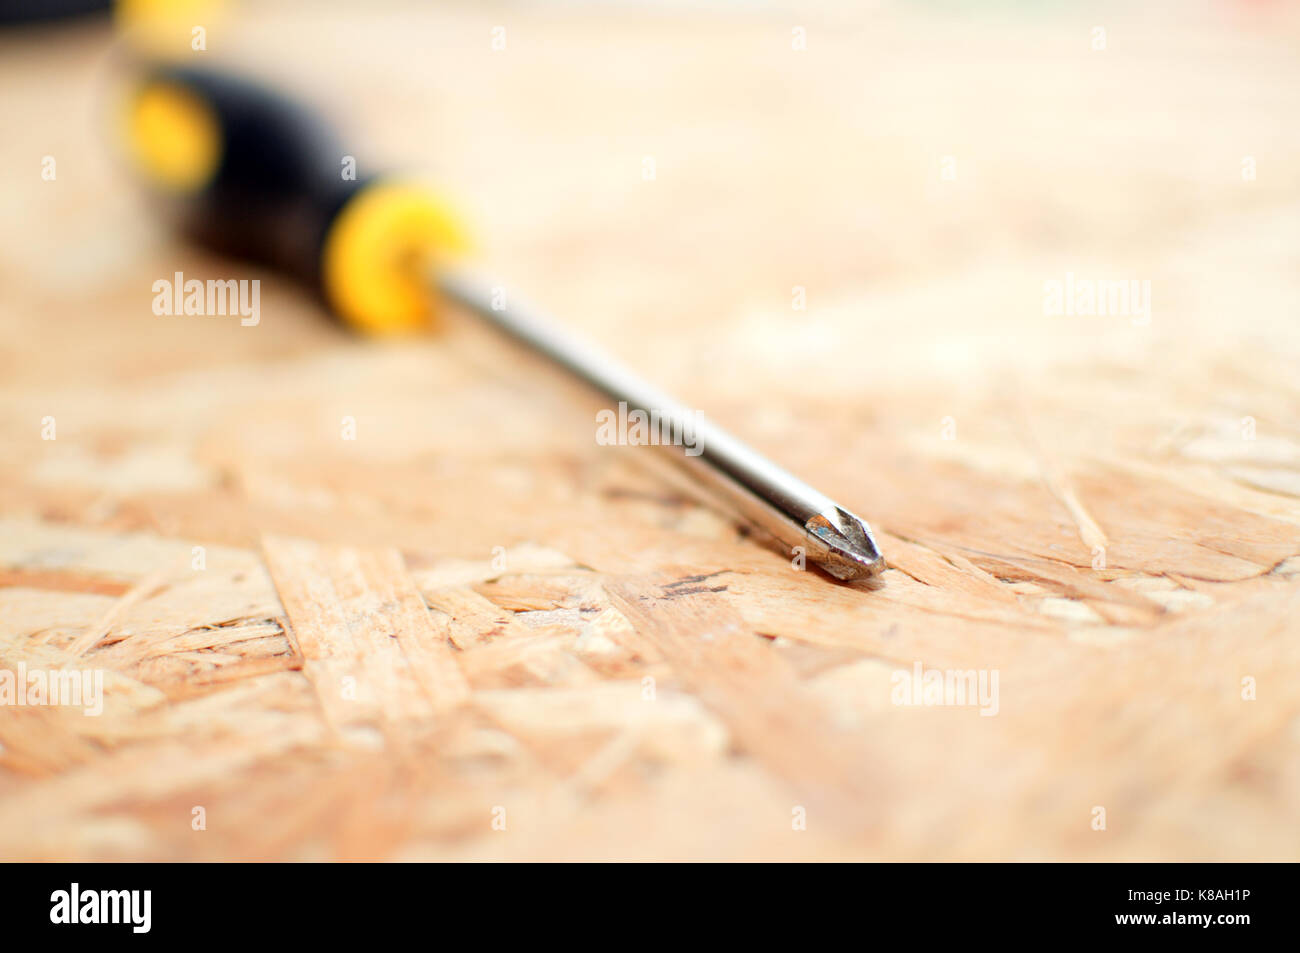 Philips screwdriver on a wooden shelf Stock Photo